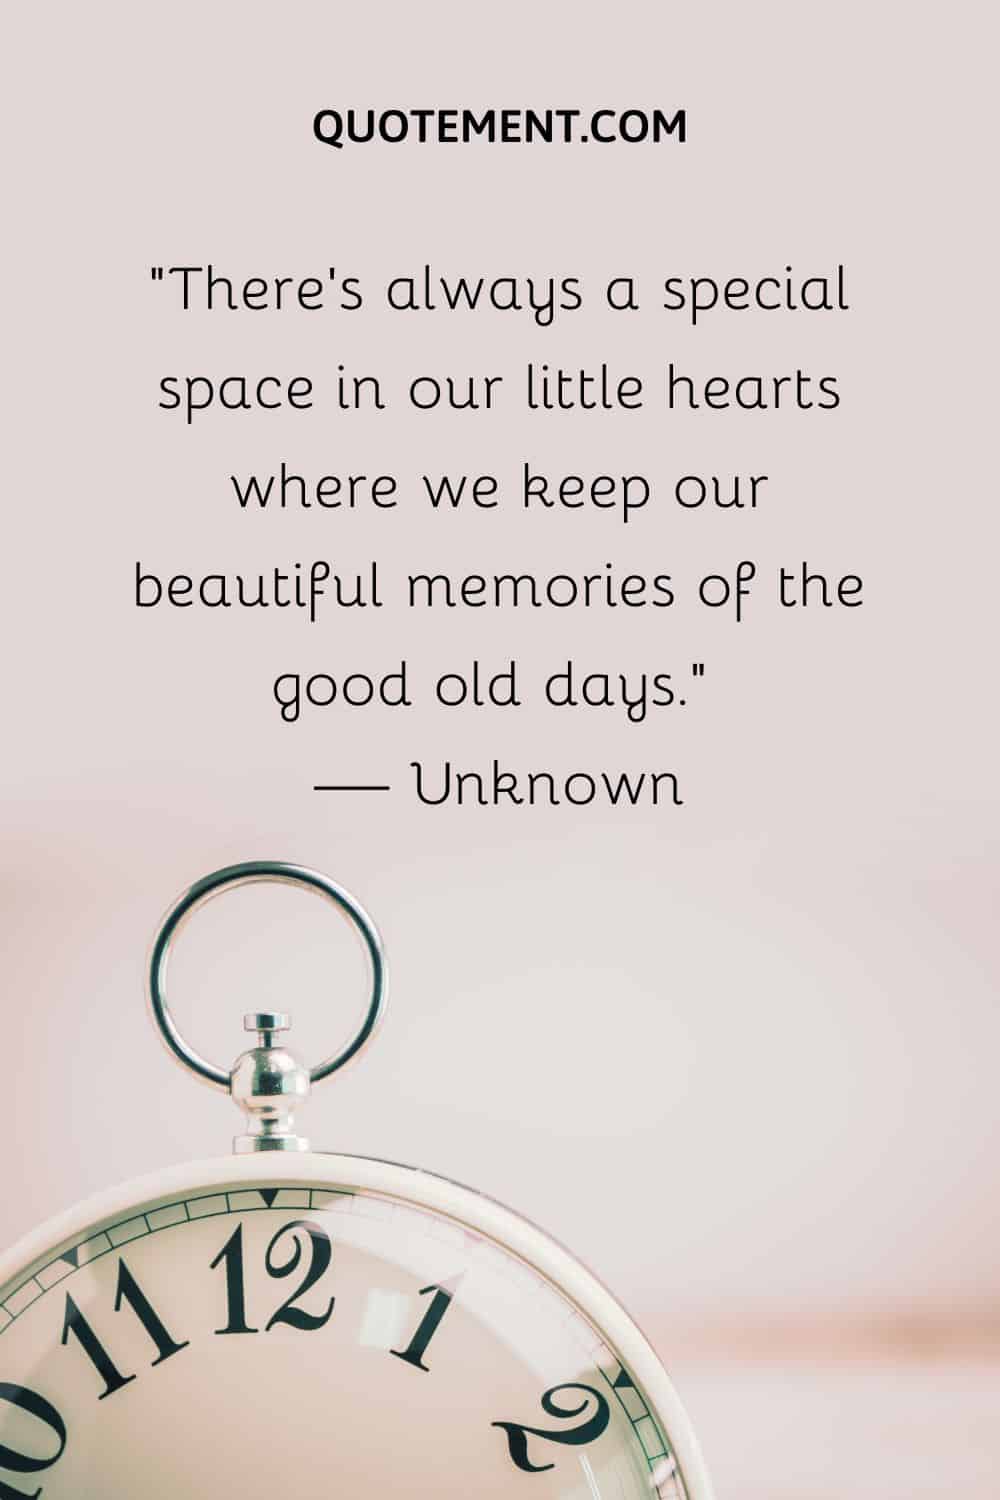 There’s always a special space in our little hearts where we keep our beautiful memories of the good old days